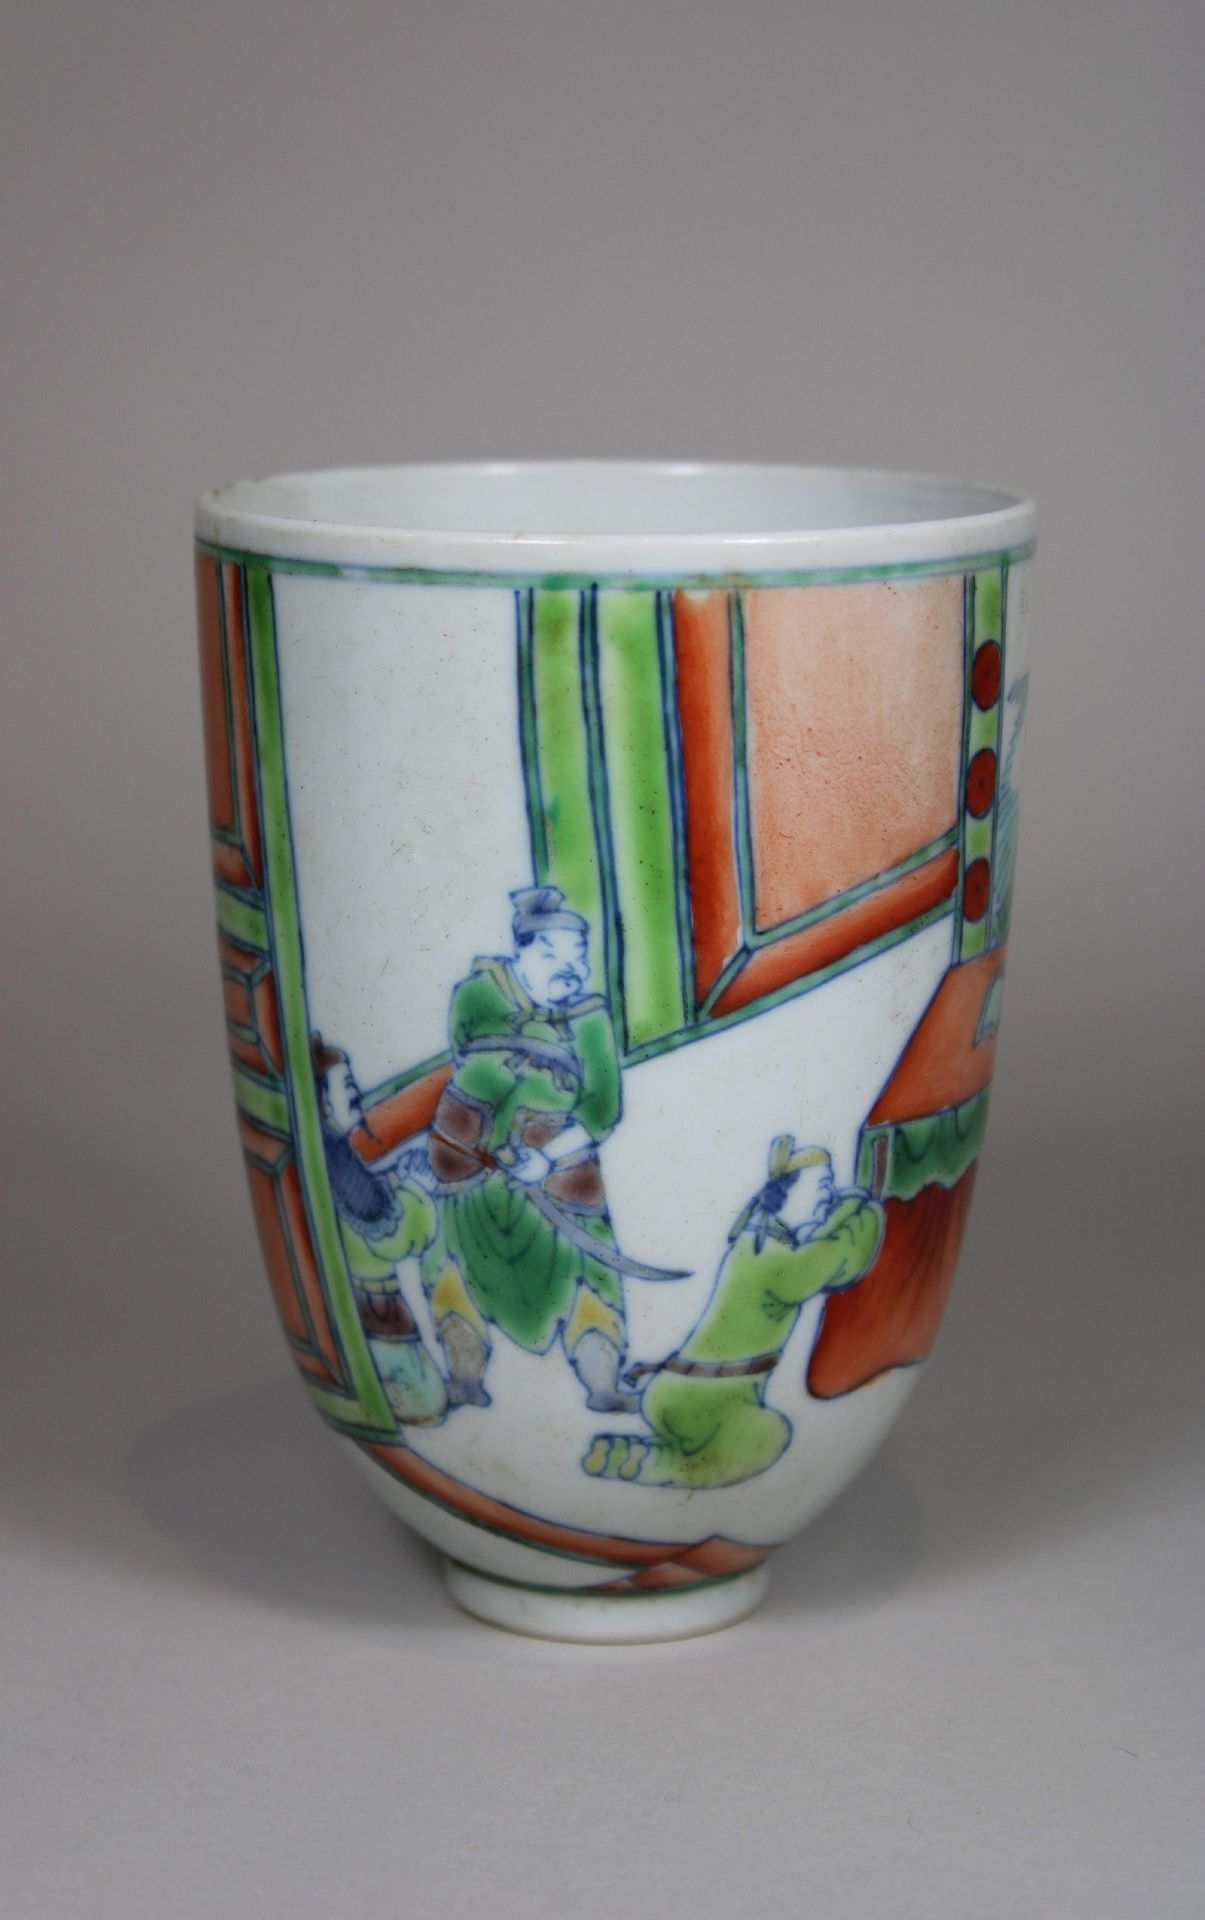 Teacup, China, Ming Dynastie